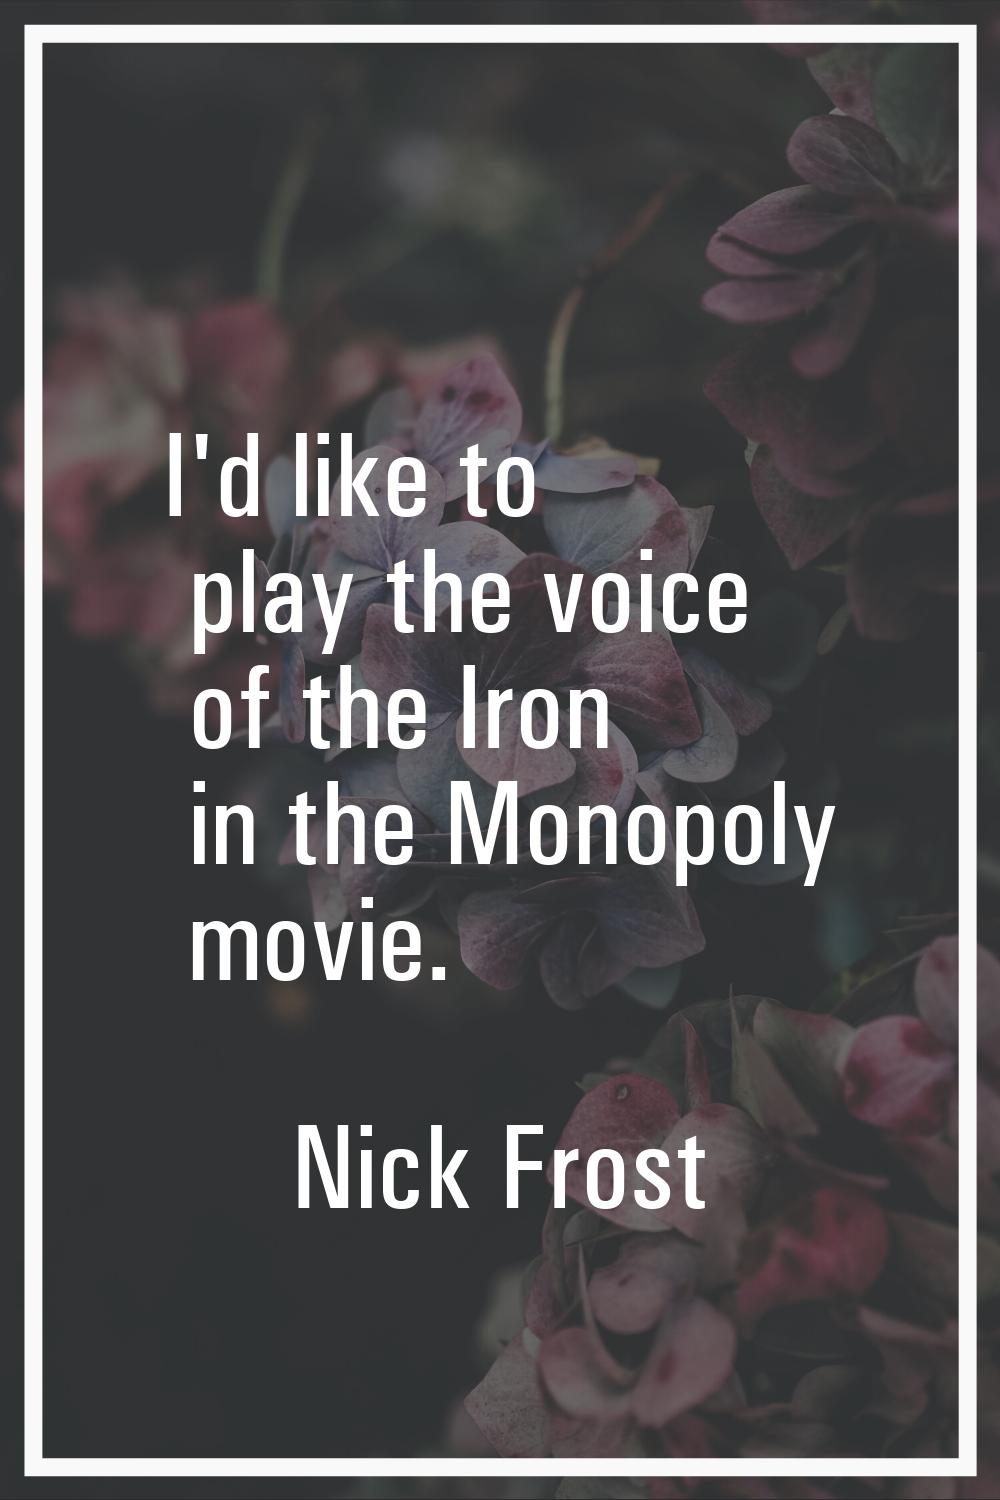 I'd like to play the voice of the Iron in the Monopoly movie.